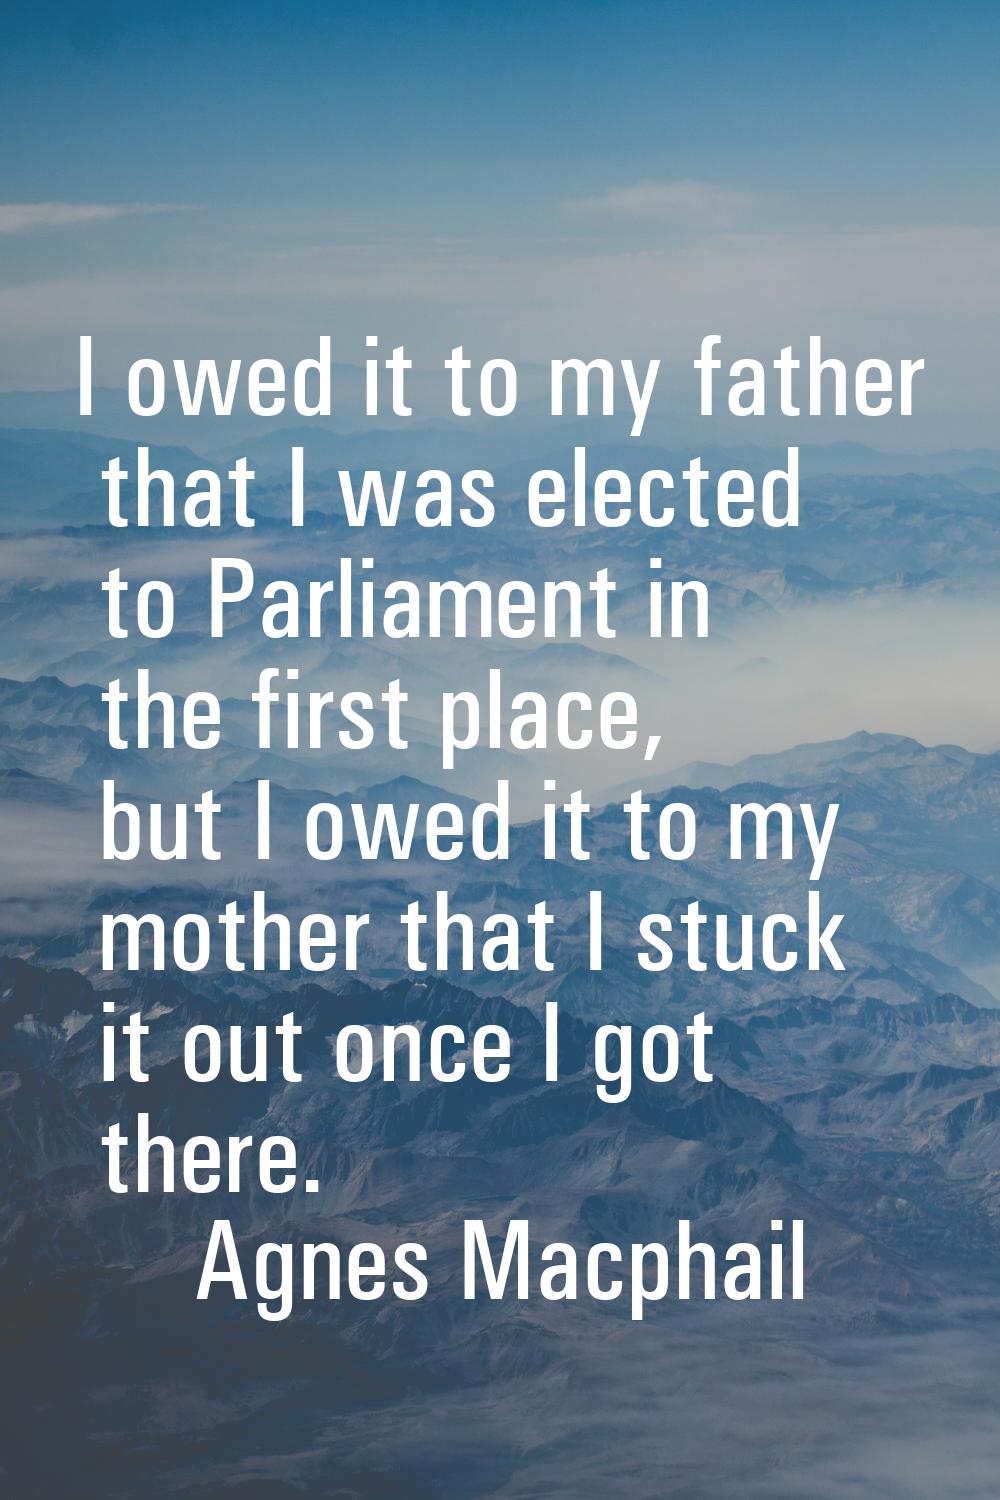 I owed it to my father that I was elected to Parliament in the first place, but I owed it to my mot